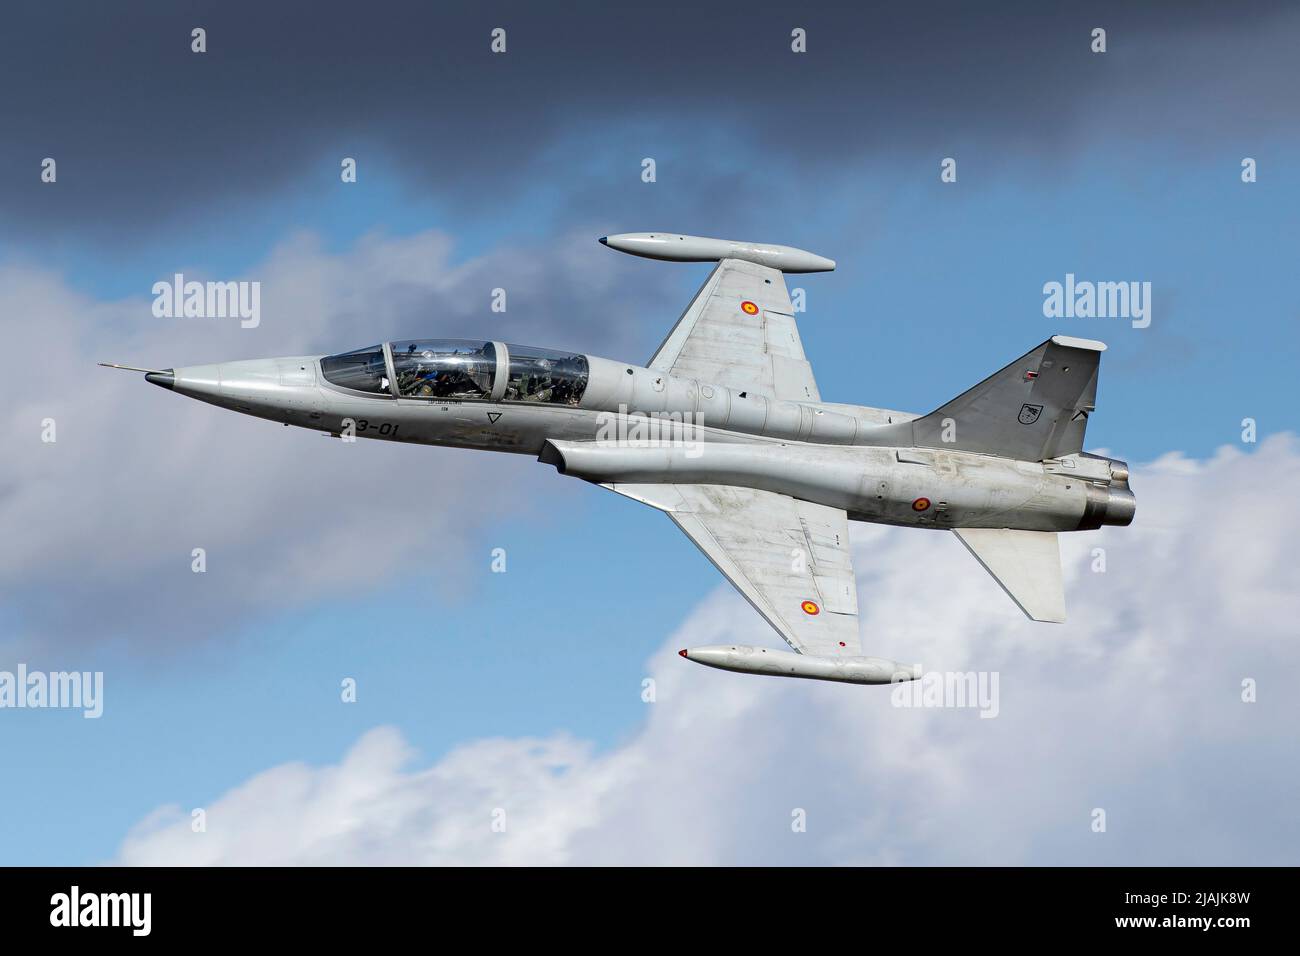 A Spanish Air Force SF-5M Freedom Fighter training jet in flight. Stock Photo